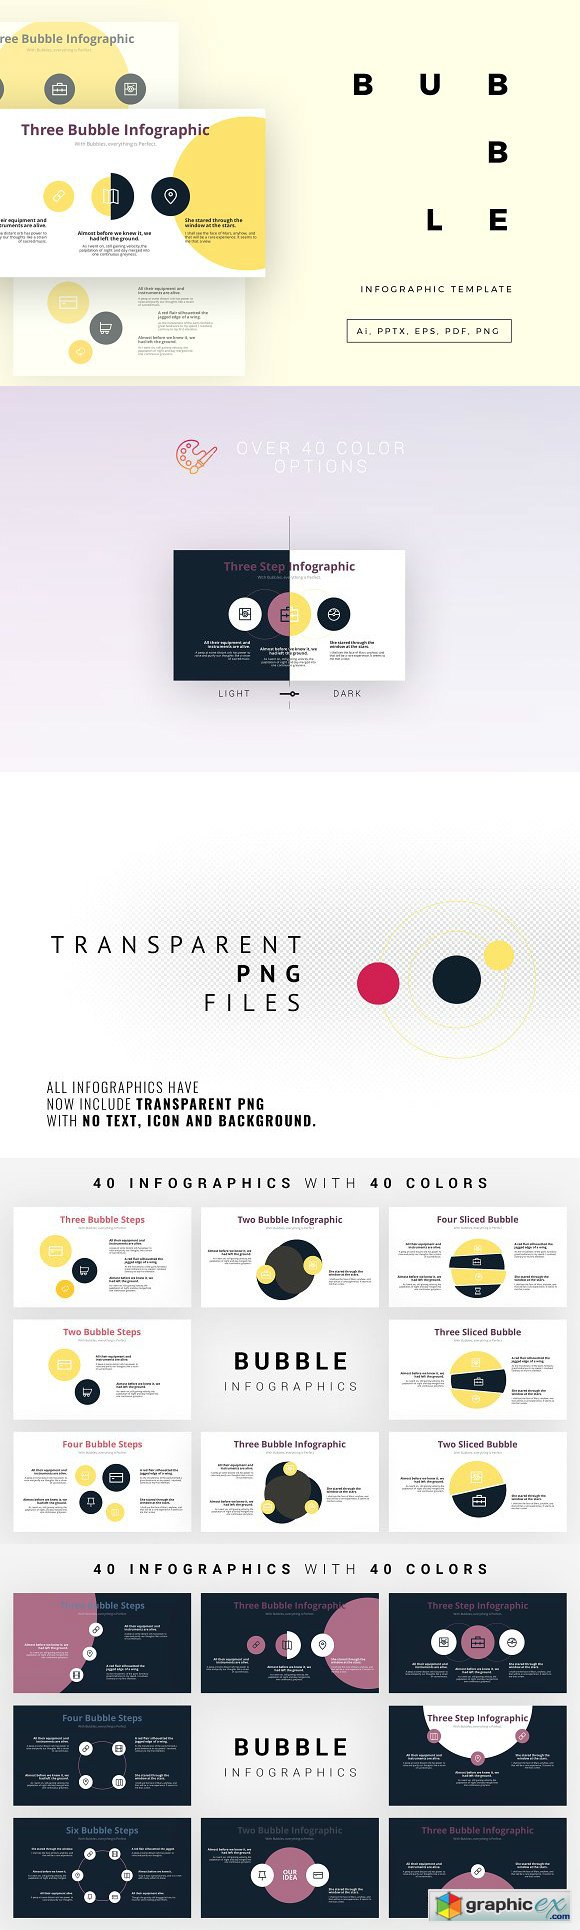 BUBBLE Infographic Template 1632577